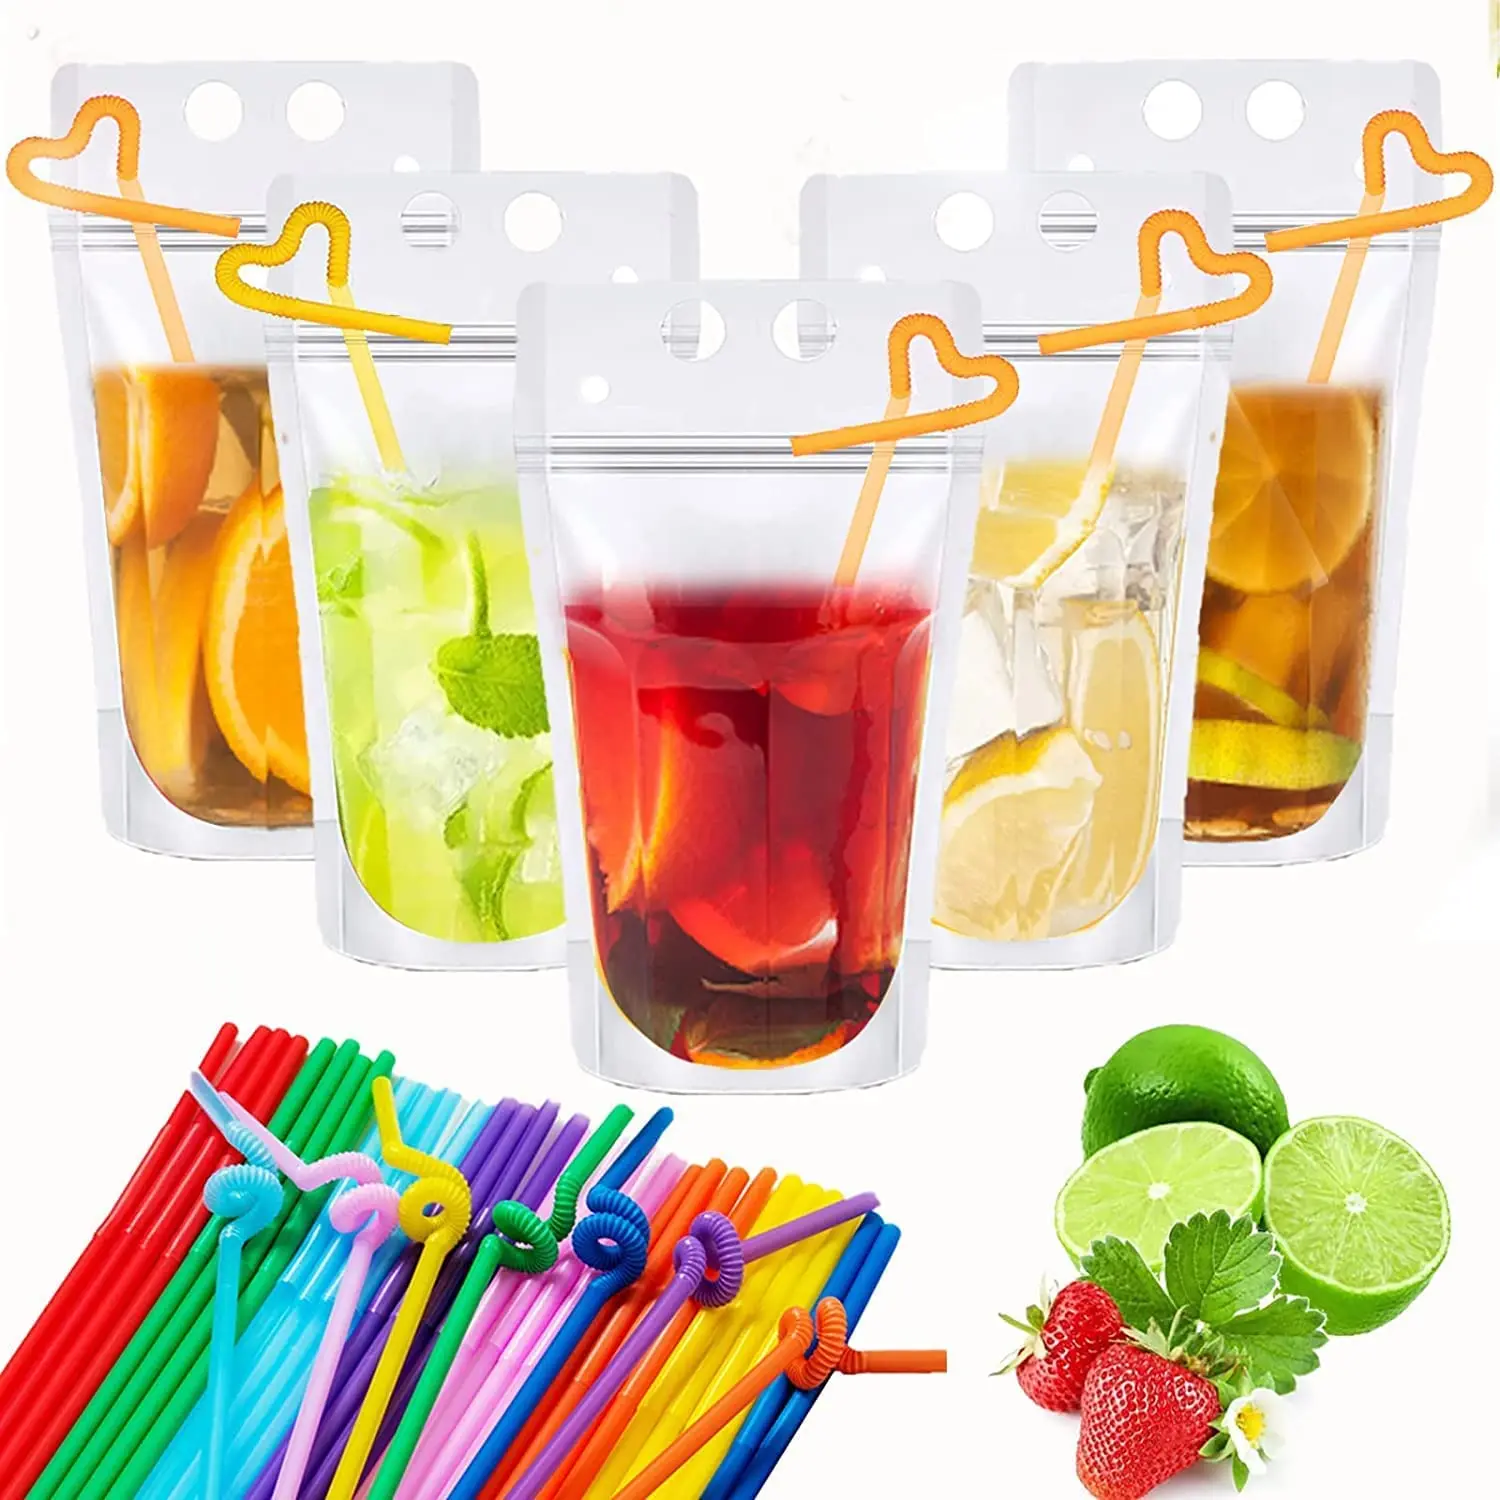 

50 Pcs Drink Pouches Juice Bags Reusable Drink Cocktail Smoothies Pouches For Party Summer Fun Bags For Drink With 50 Straws